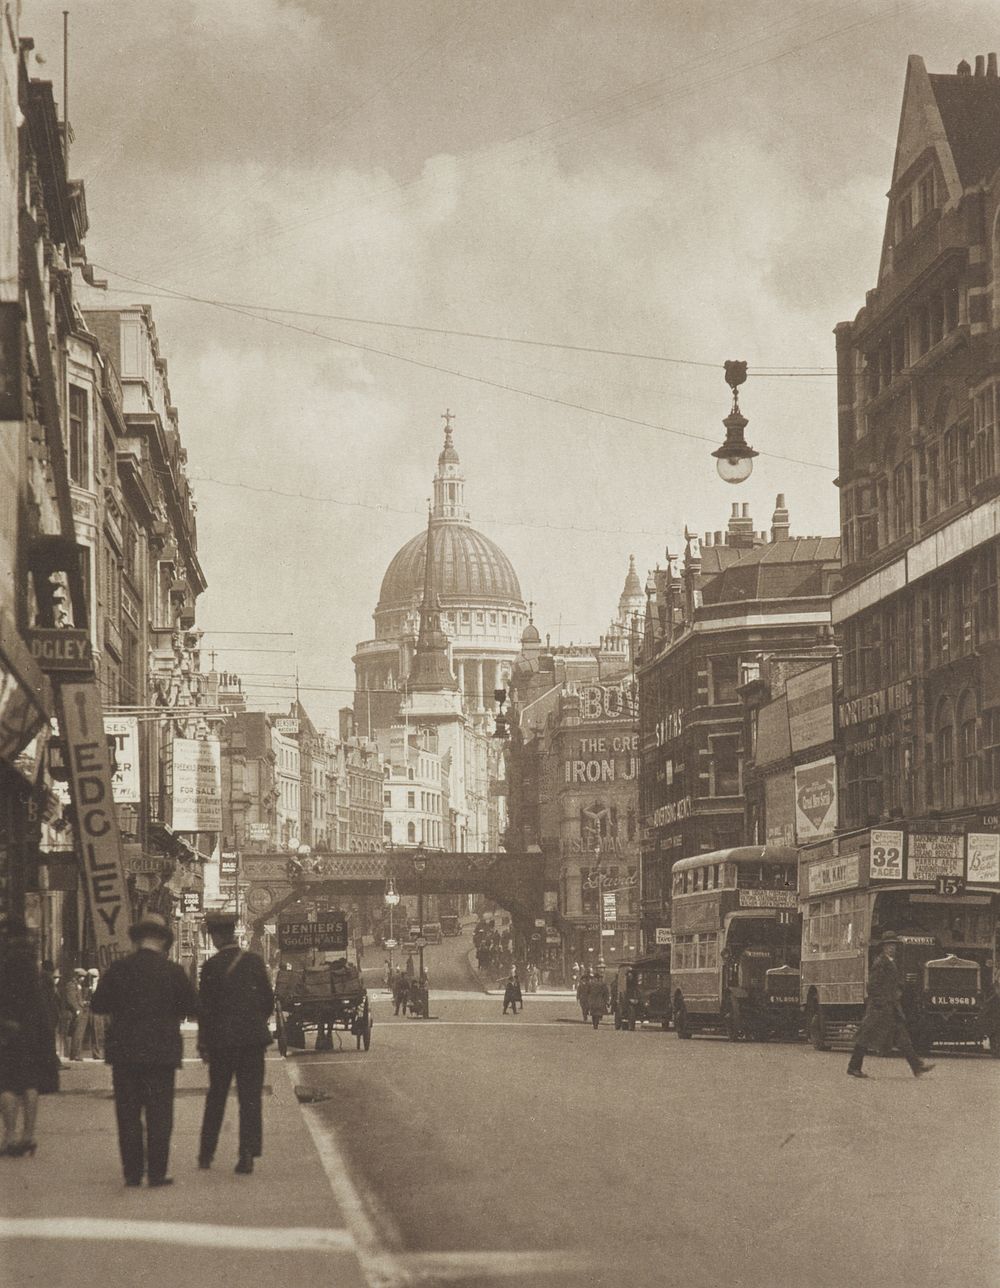 Fleet Street. From the album: Photograph album - London (1920s) by Harry Moult.